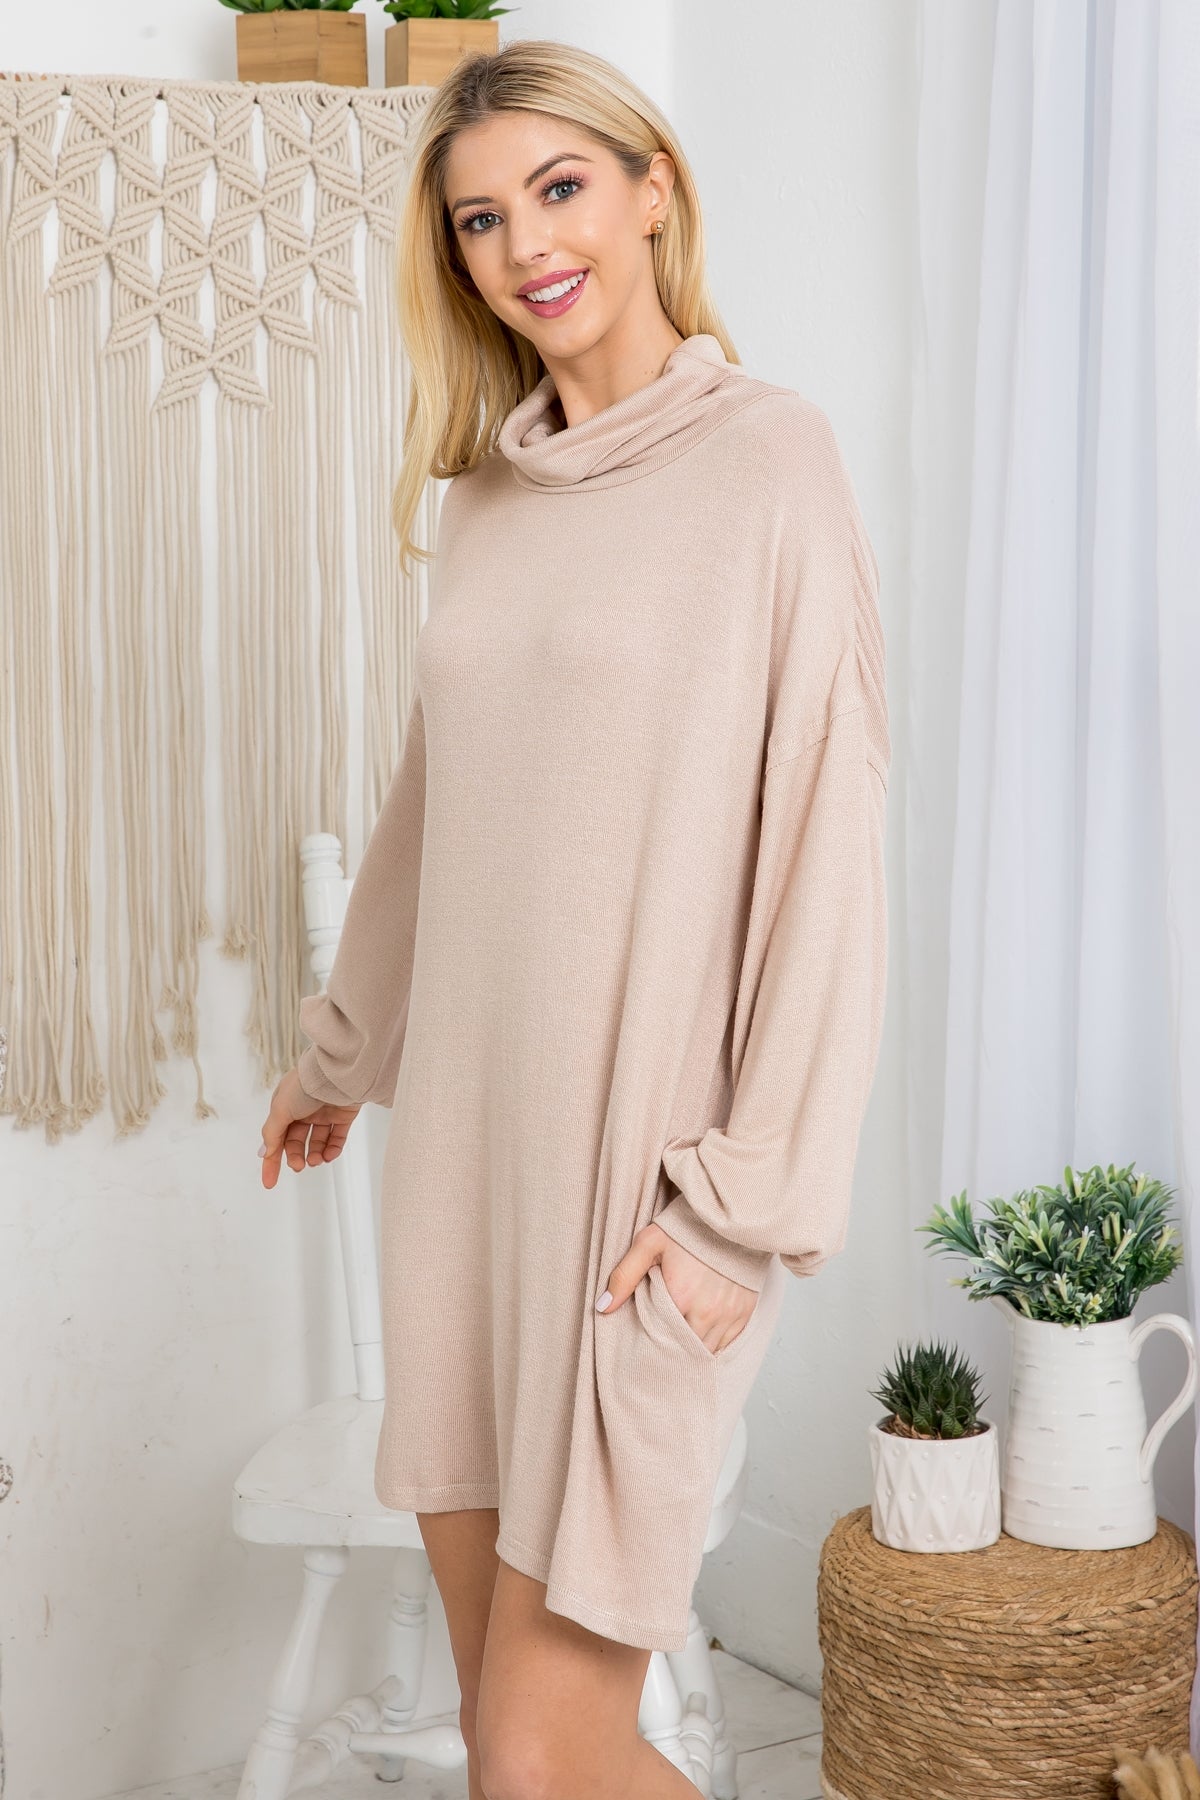 BEIGE COWL NECK WITH BOTTOM SIDE POCKET CUFFED LONG SLEEVE BABYDOLL DRESS (NOW $5.75 ONLY!)